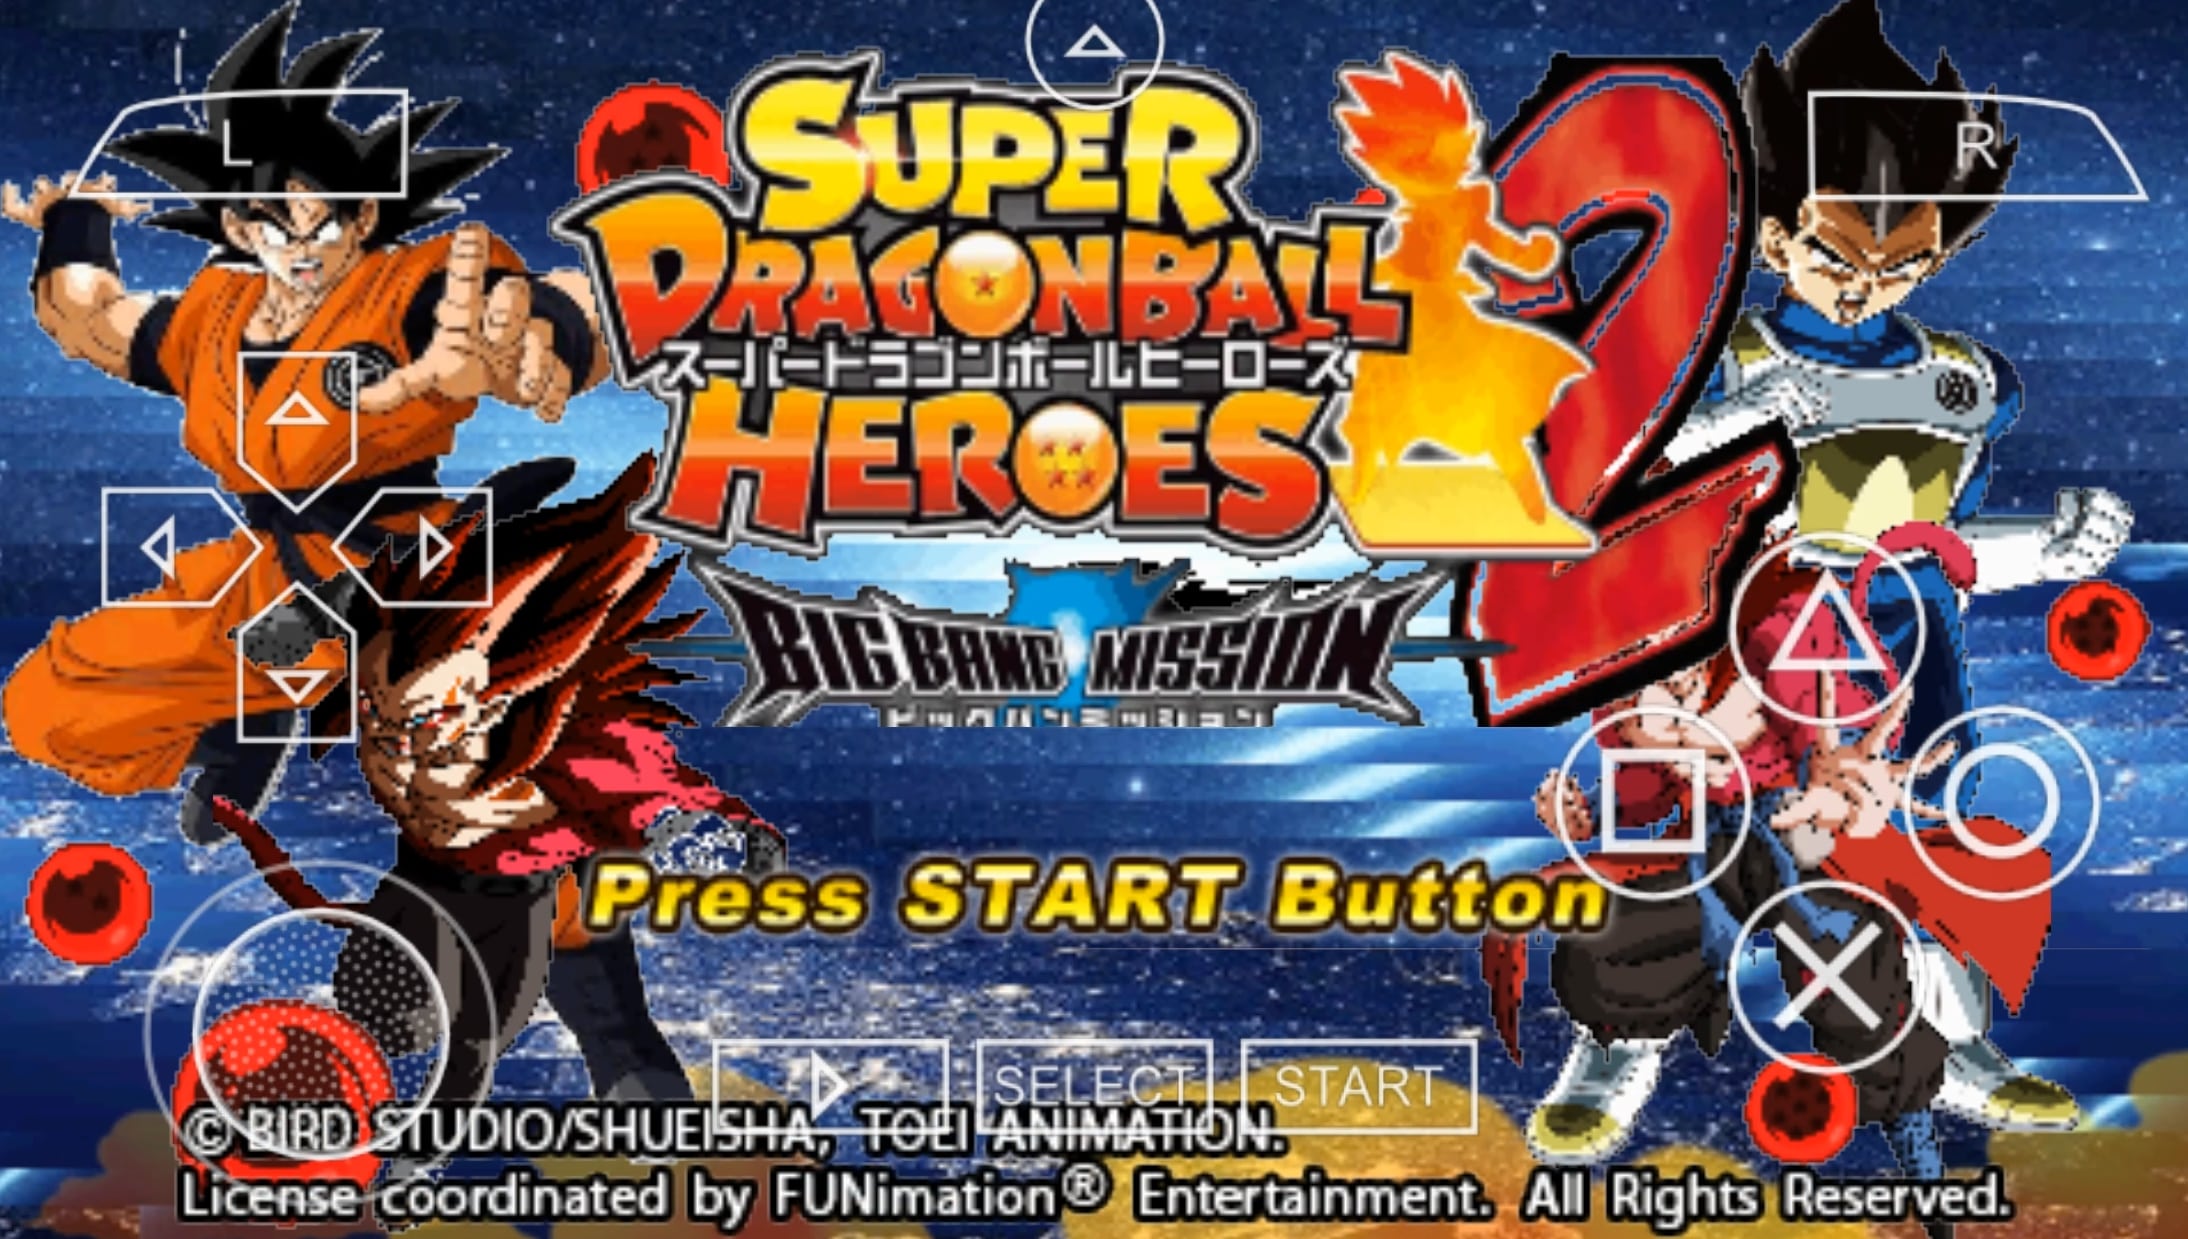 Super Dragon Ball Heroes 2 Big Bang Mission Android PSP Game Mod Download